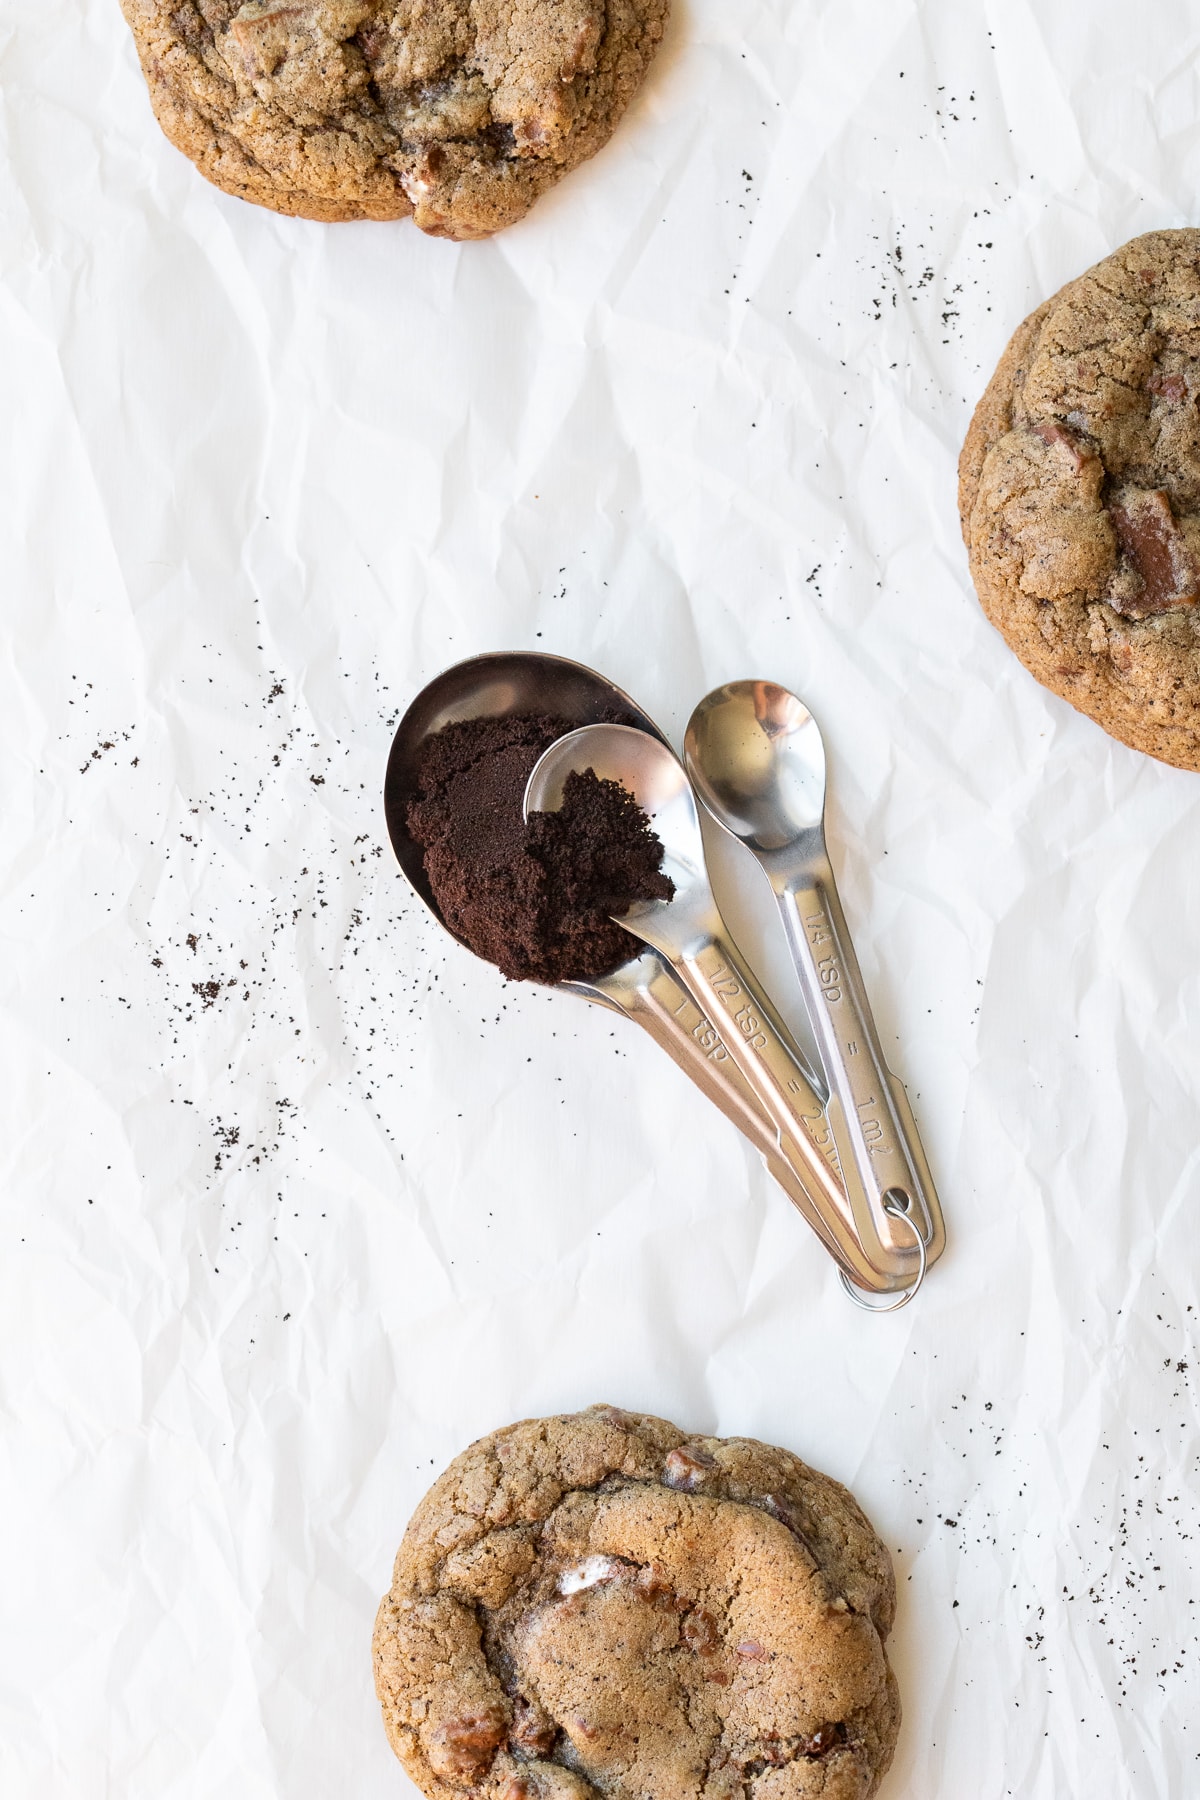 Teaspoon set being used to measure espresso powder, surrounded by cookies.